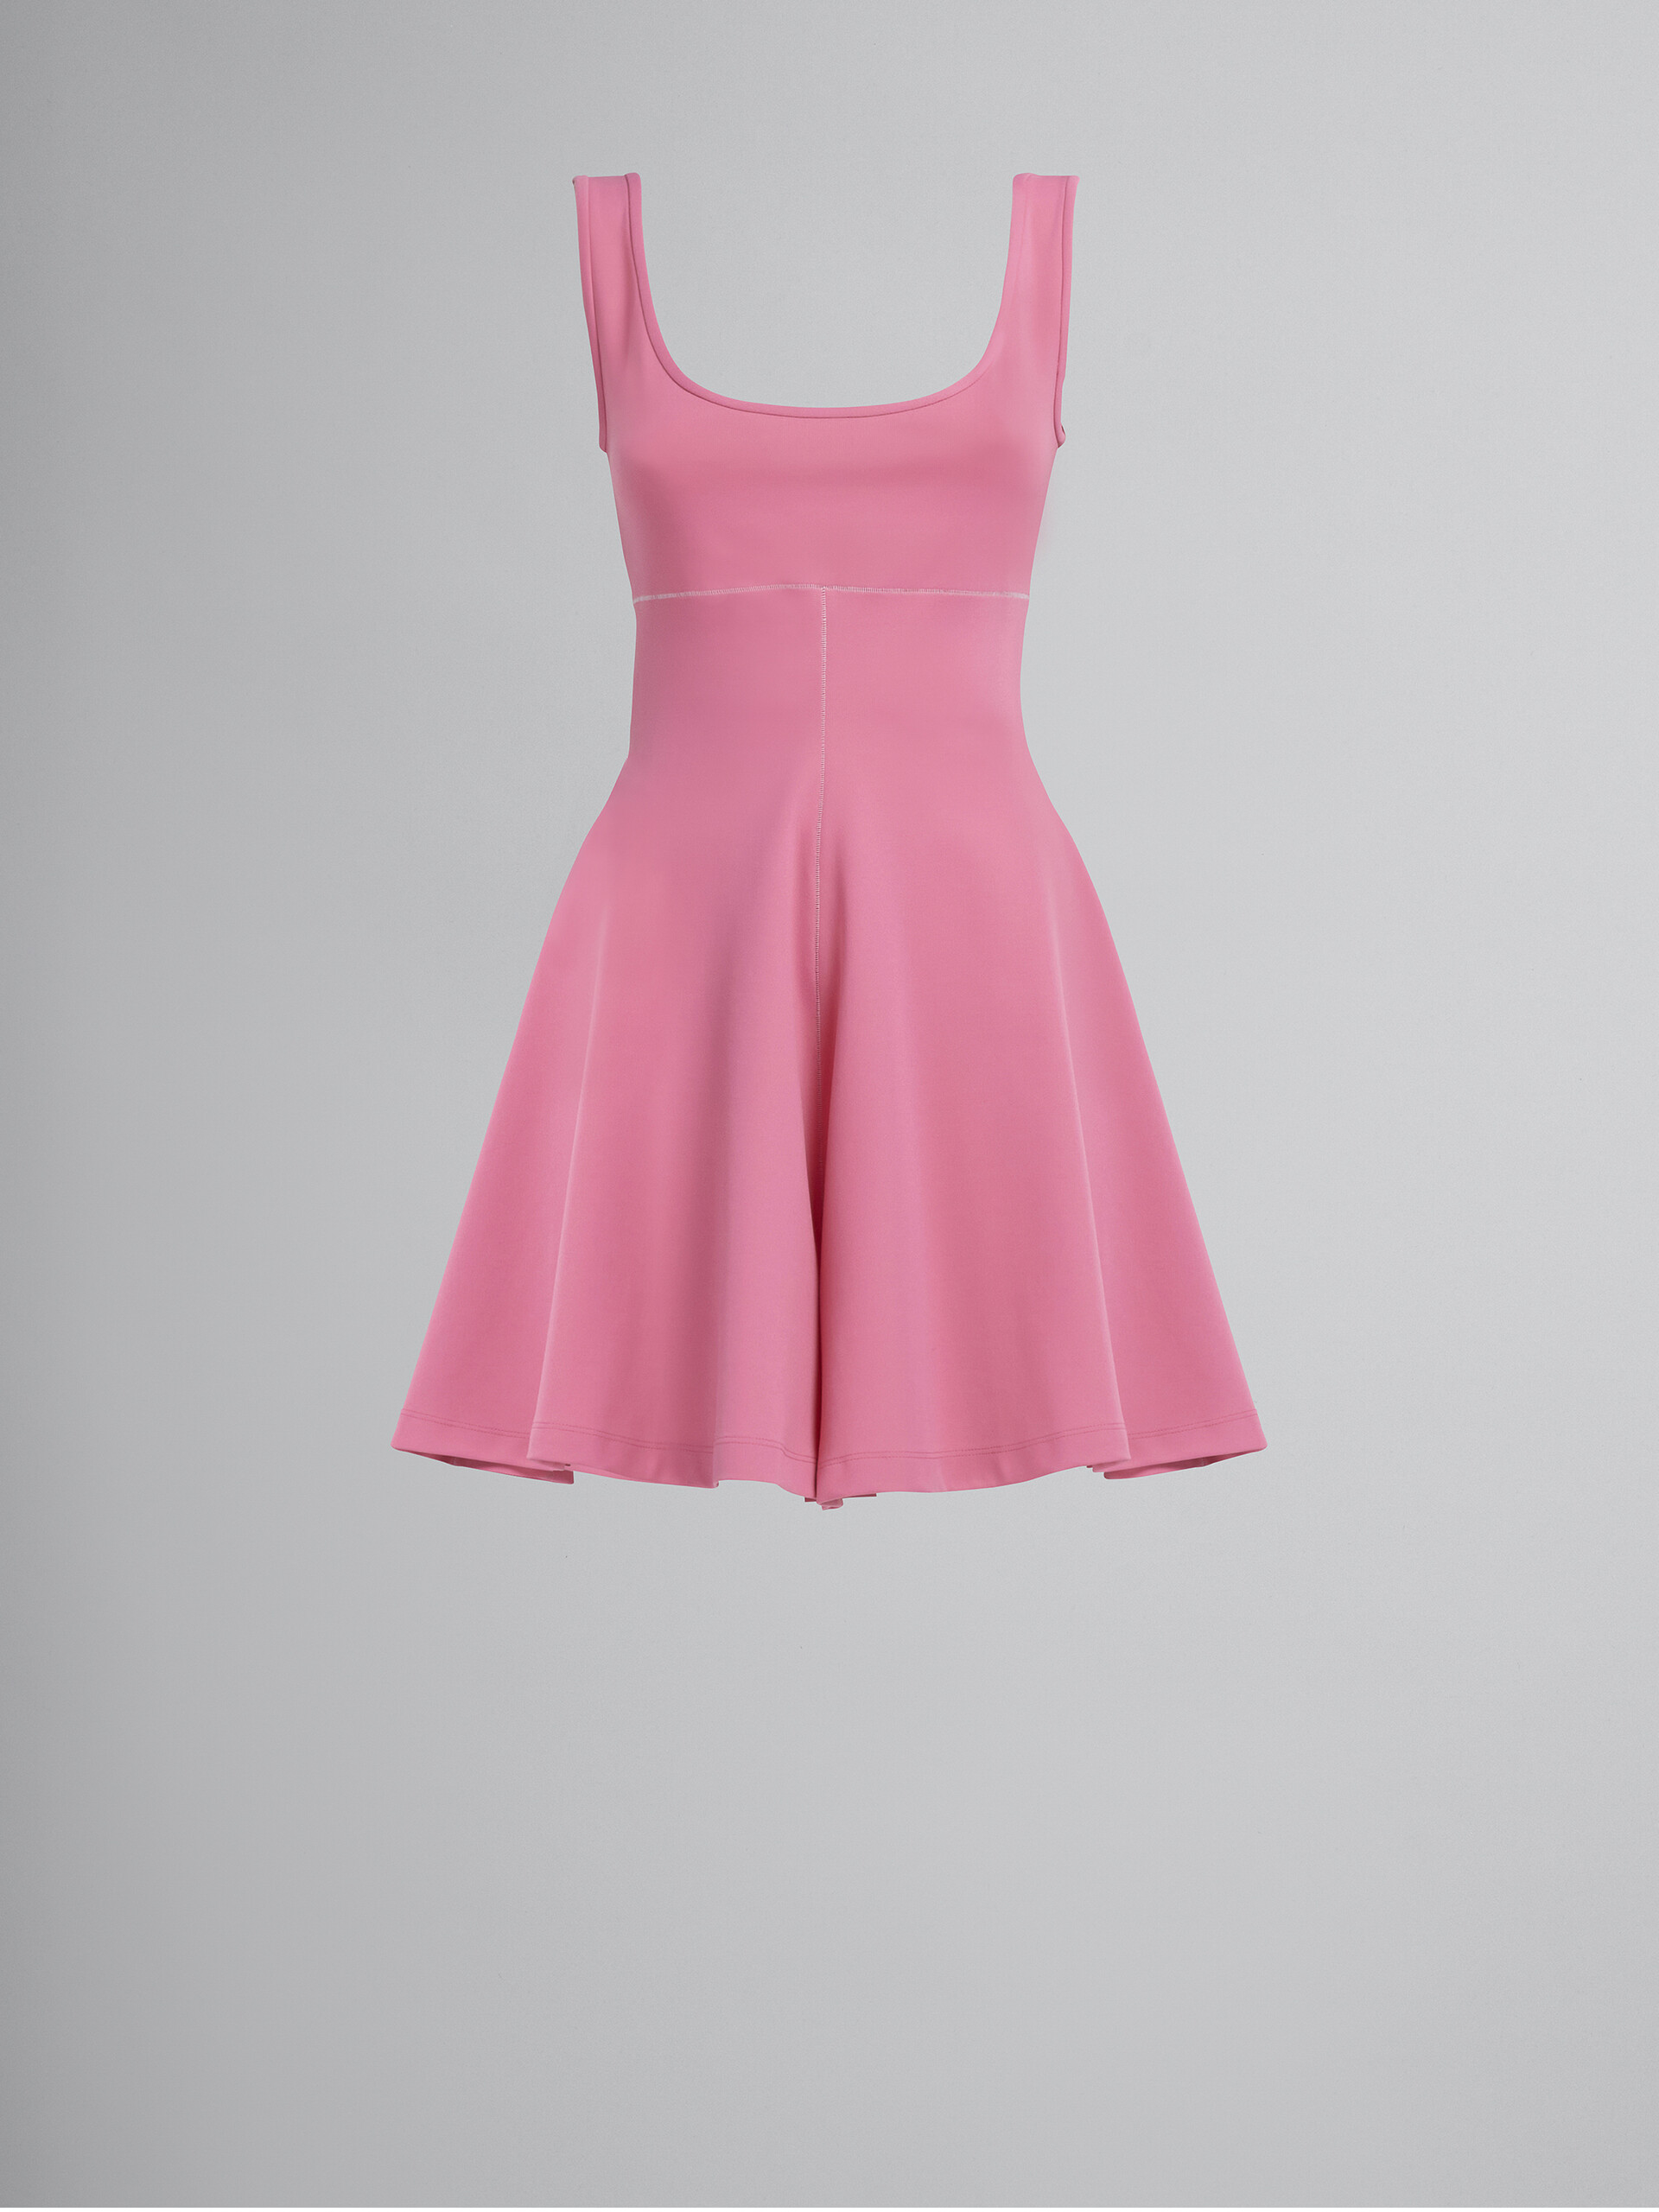 Short dress in pink stretch fabric - Dresses - Image 1